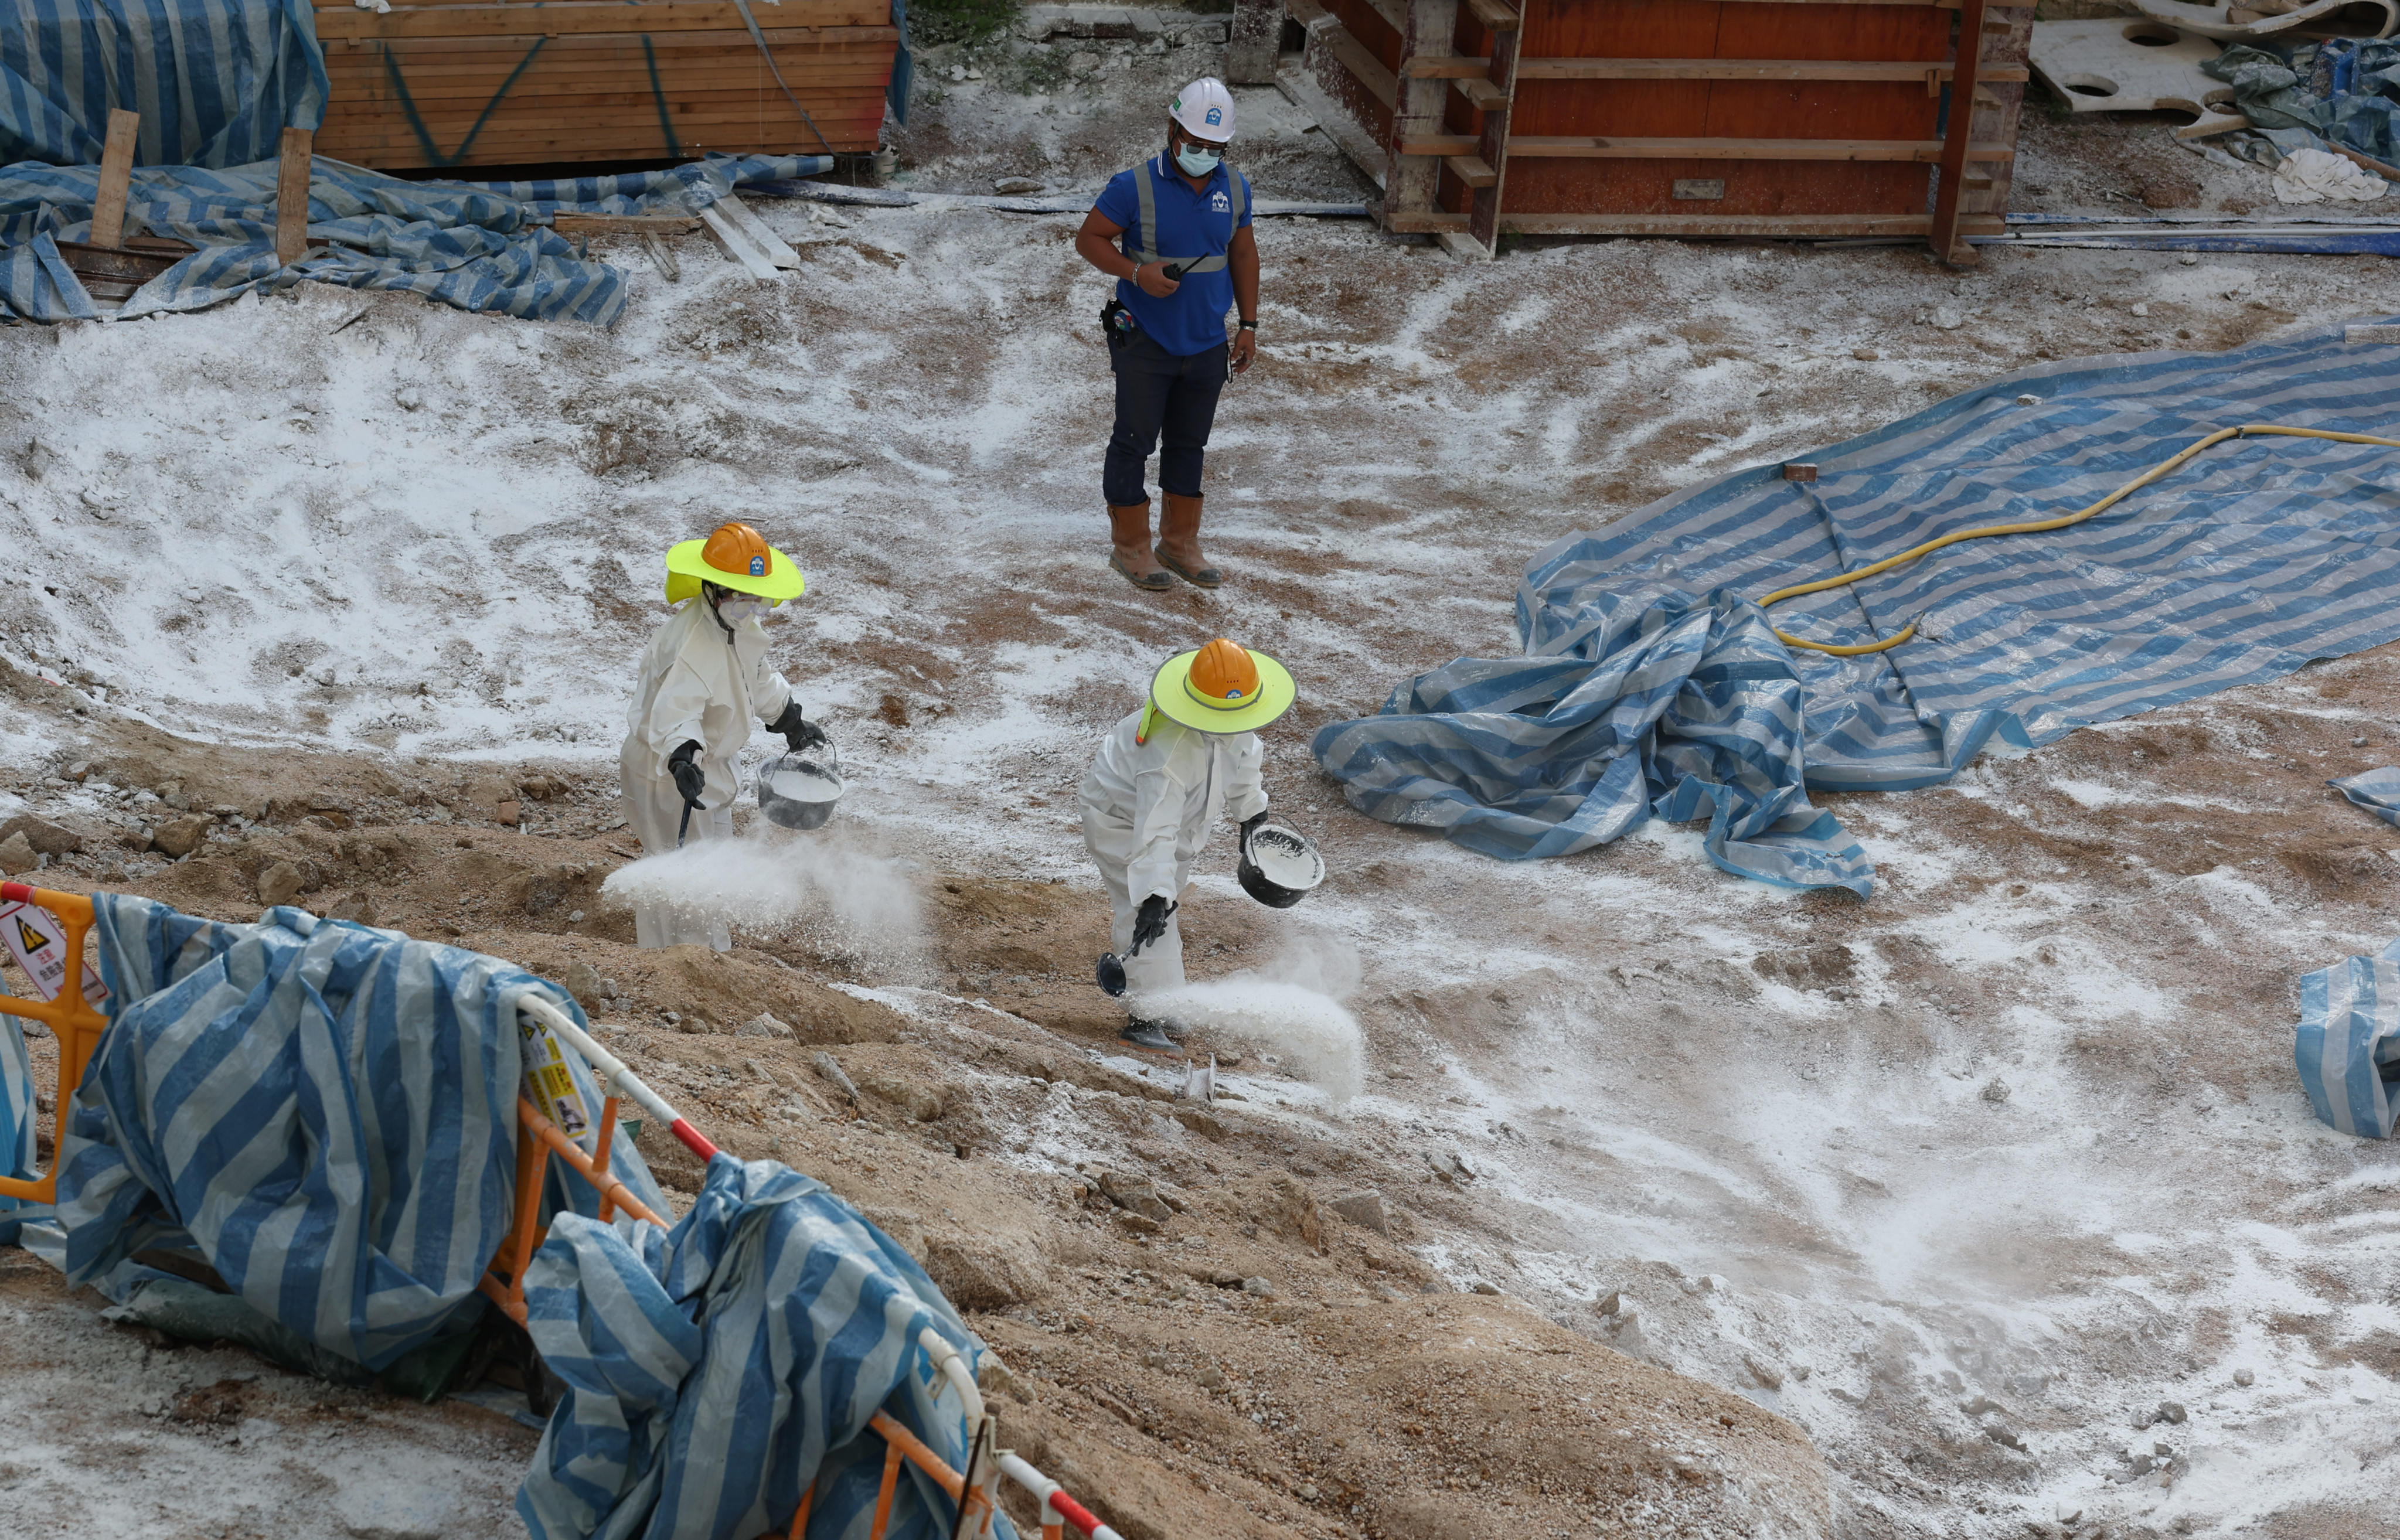 Workers sprayed disinfectant at a construction site in Pak Tin Estate, Sham Shui Po, after four soil samples tested positive for the bacterium that causes melioidosis. Photo: Yik Yeung-man